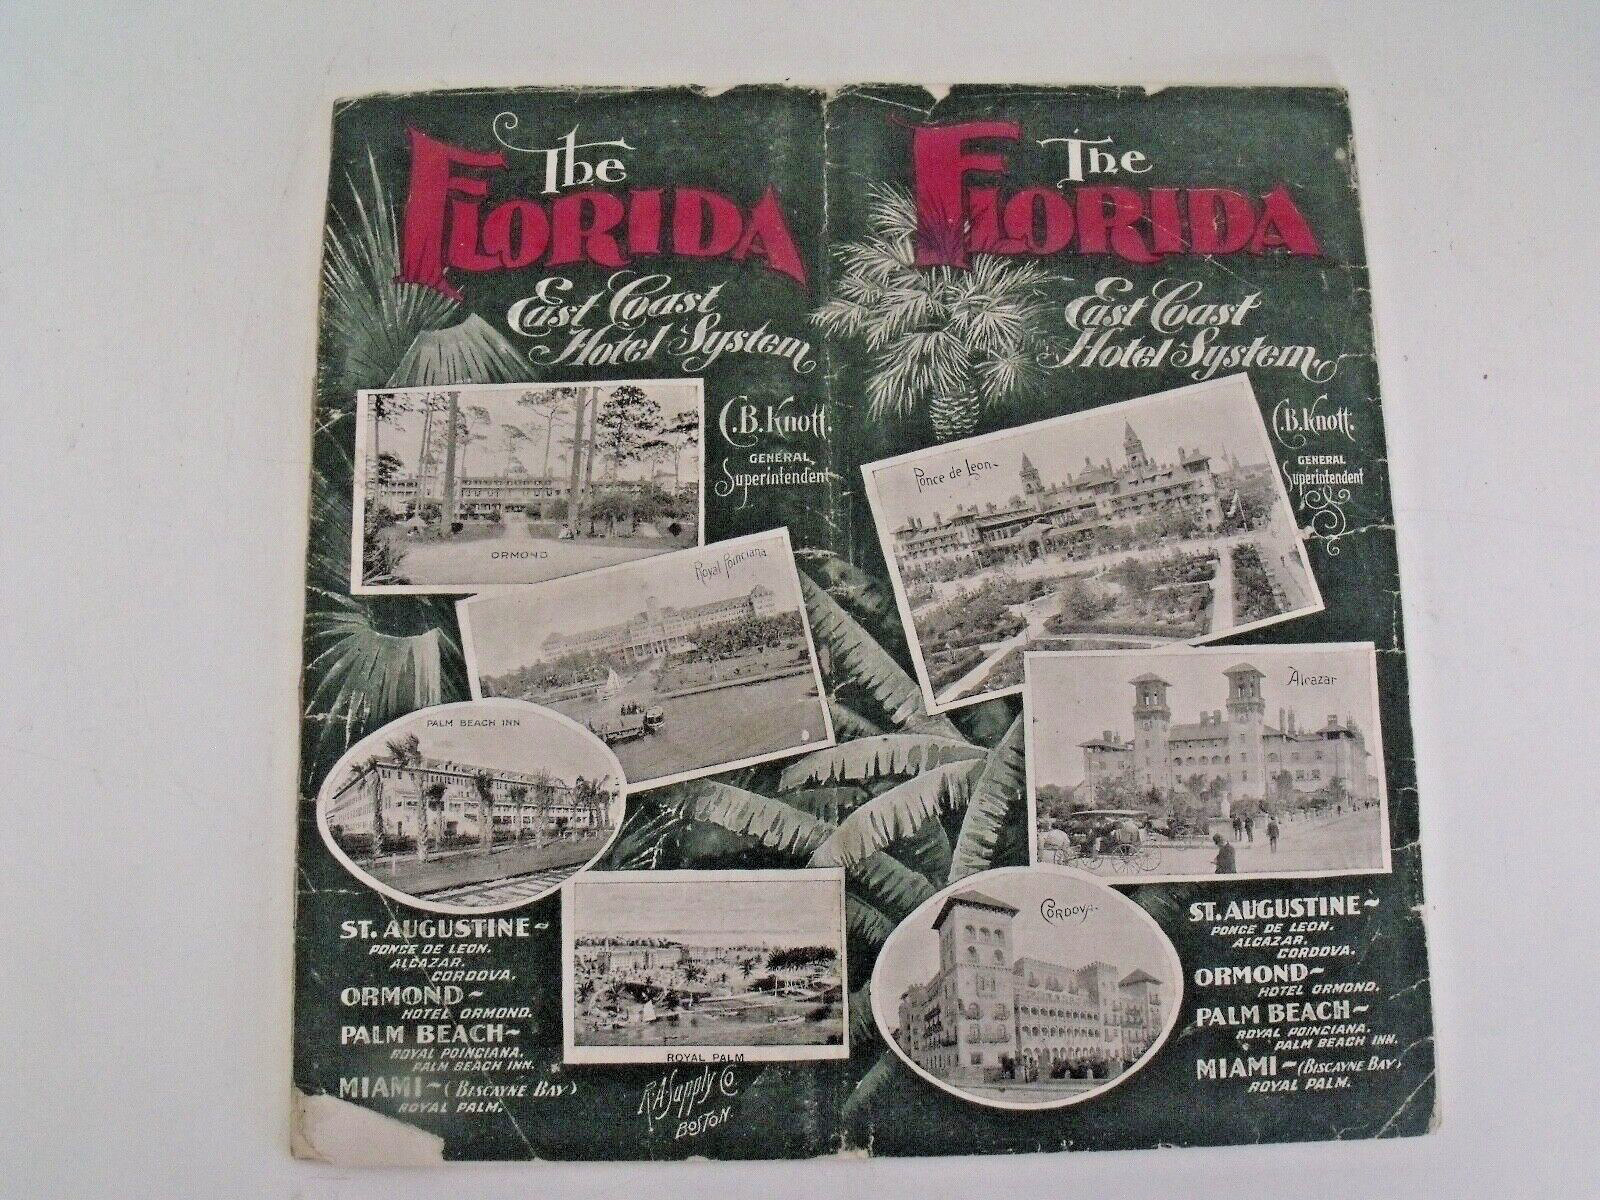 Rare and Early 1895 The Florida East Coast Hotel System Booklet